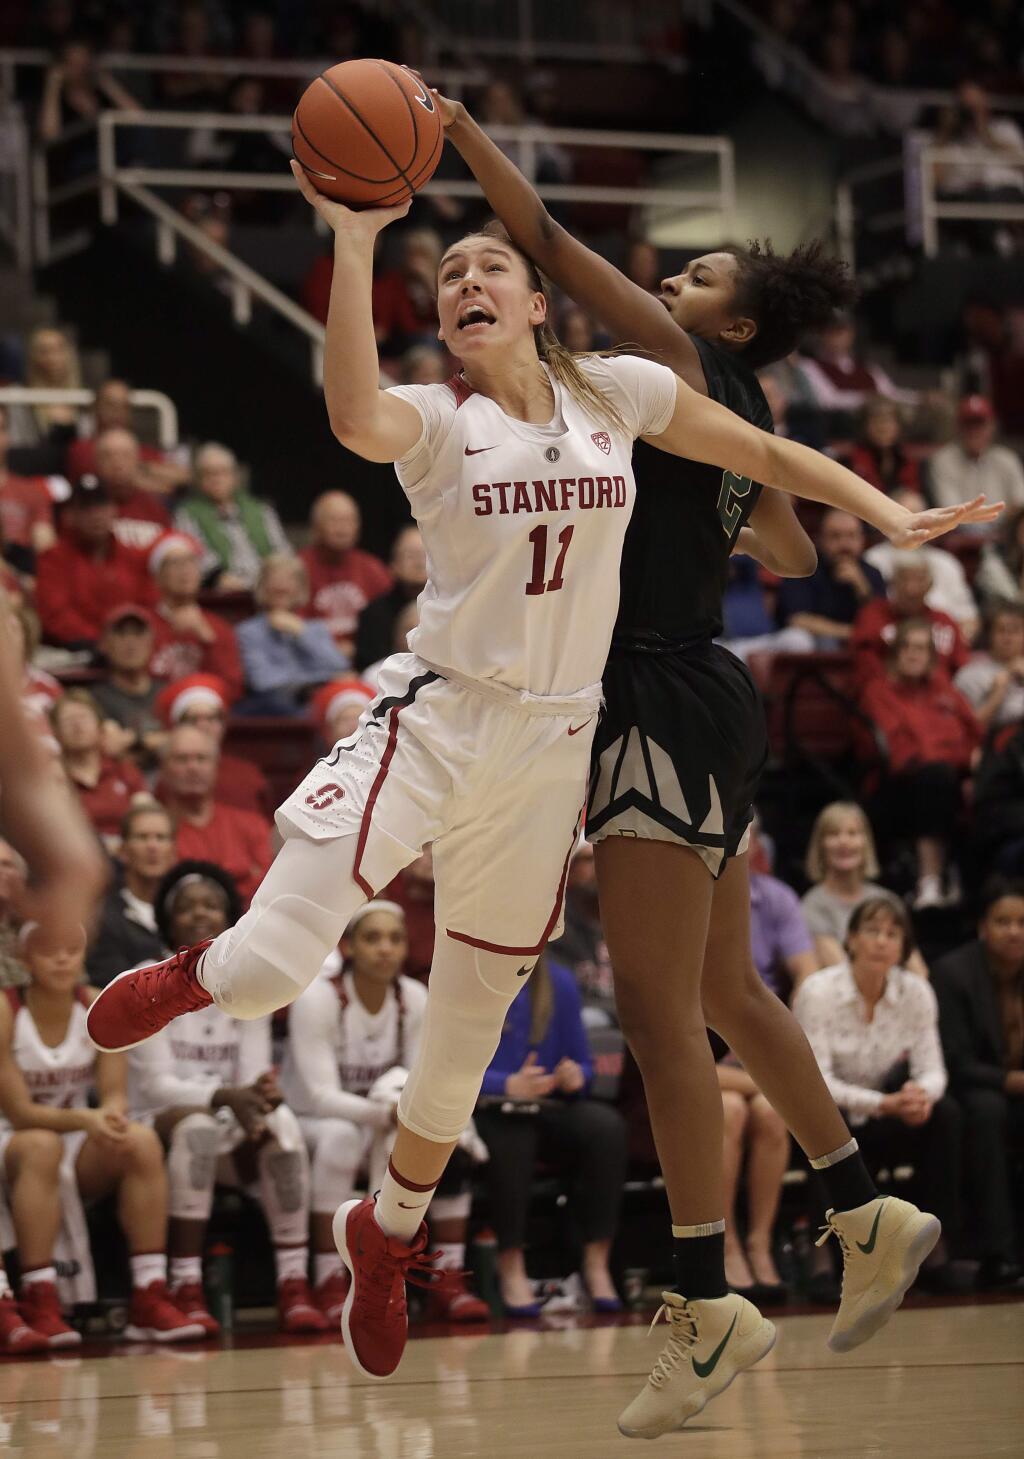 Stanford forward Alanna Smith shoots against Baylor guard Didi Richards during the second half in Stanford, Saturday, Dec. 15, 2018. (AP Photo/Jeff Chiu)